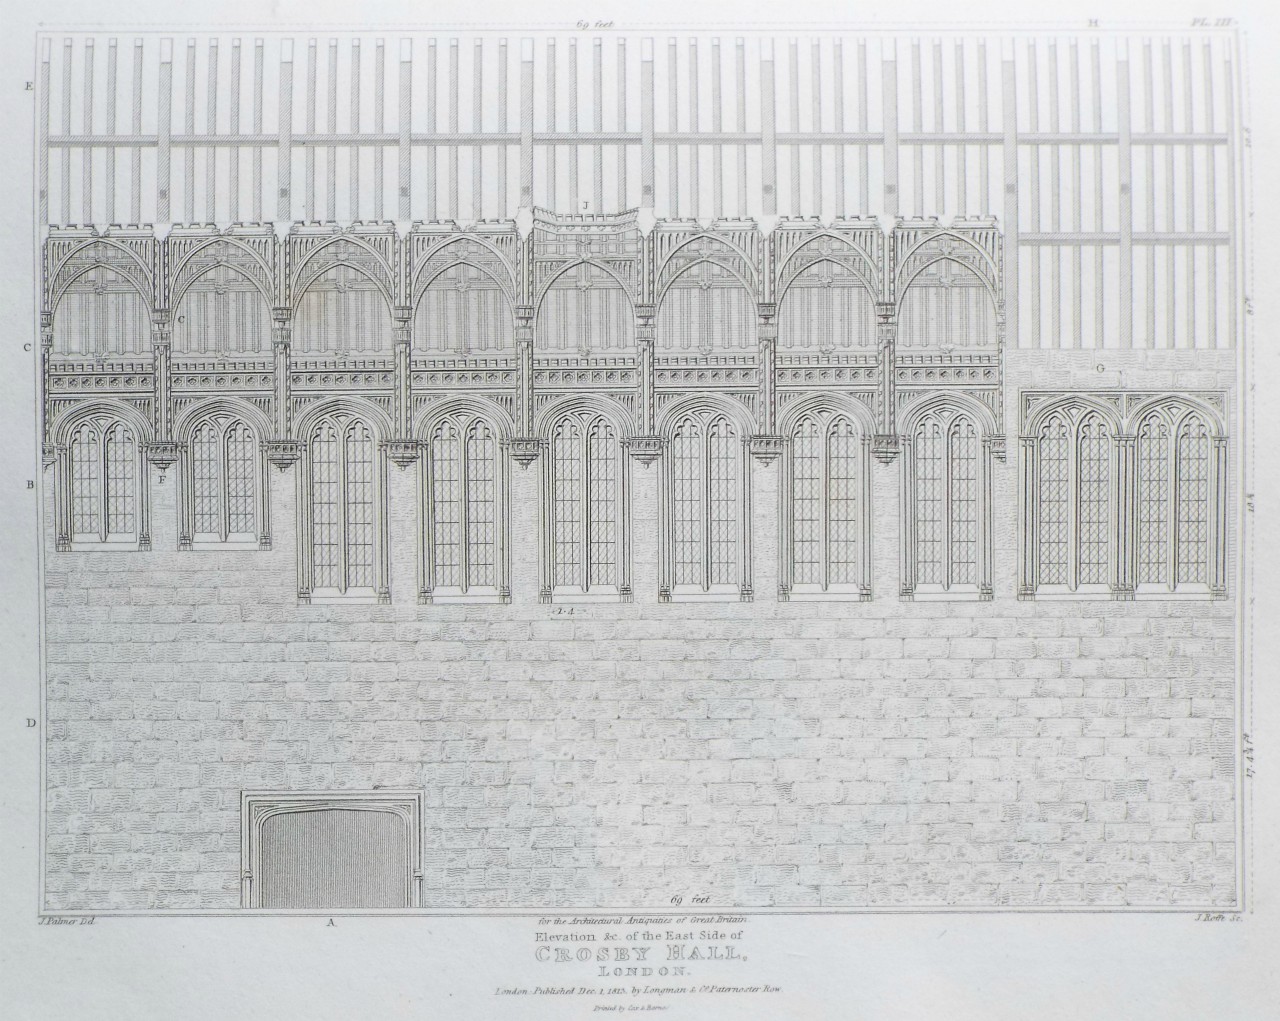 Print - Elevation &c. of the South Side of Crosby Hall, London. - Roffe